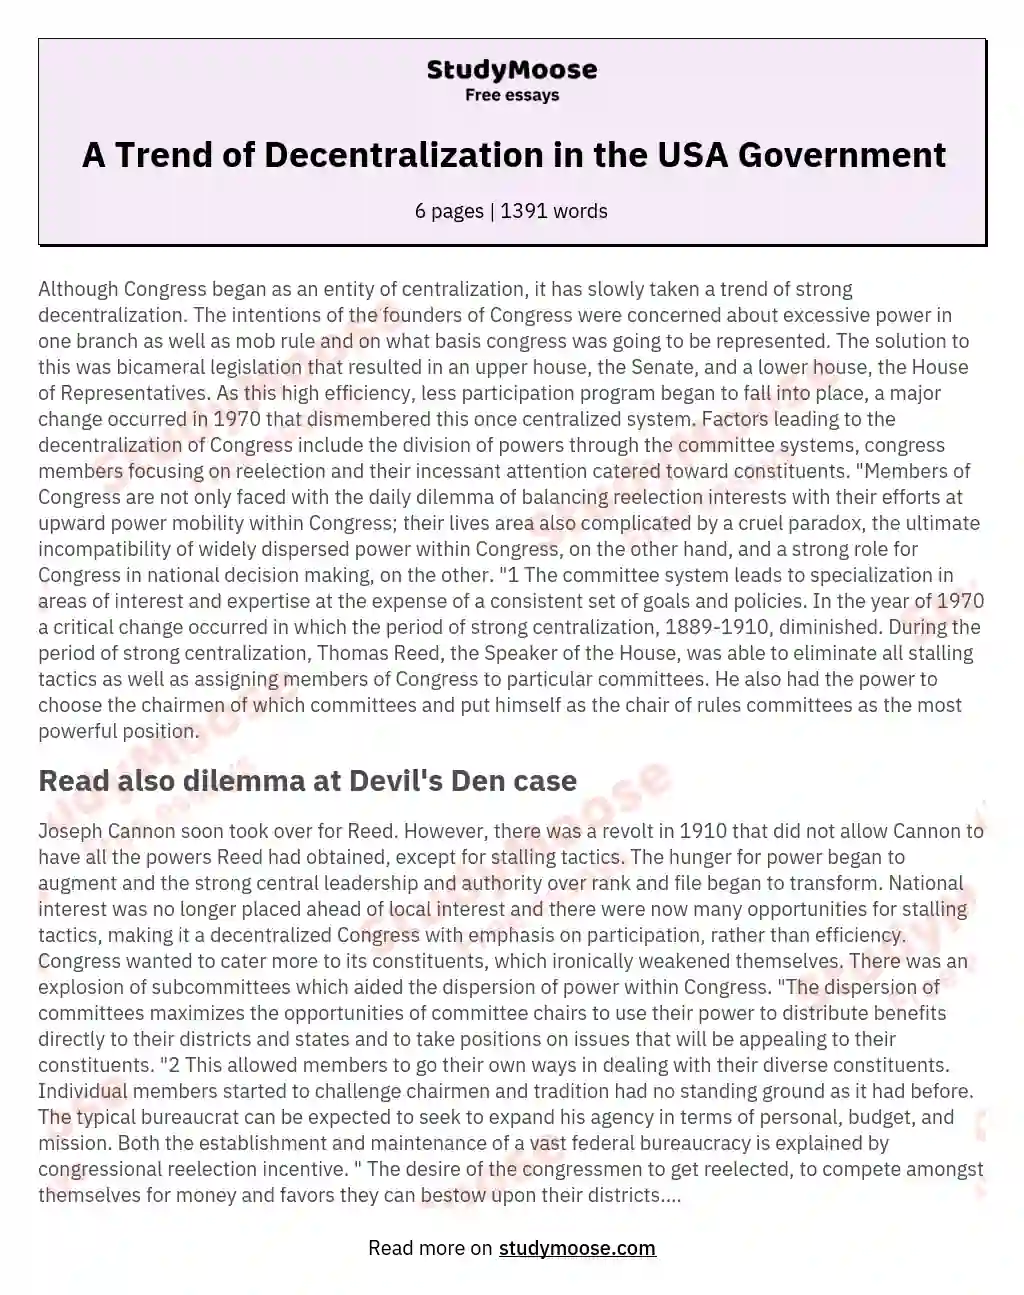 A Trend of Decentralization in the USA Government essay